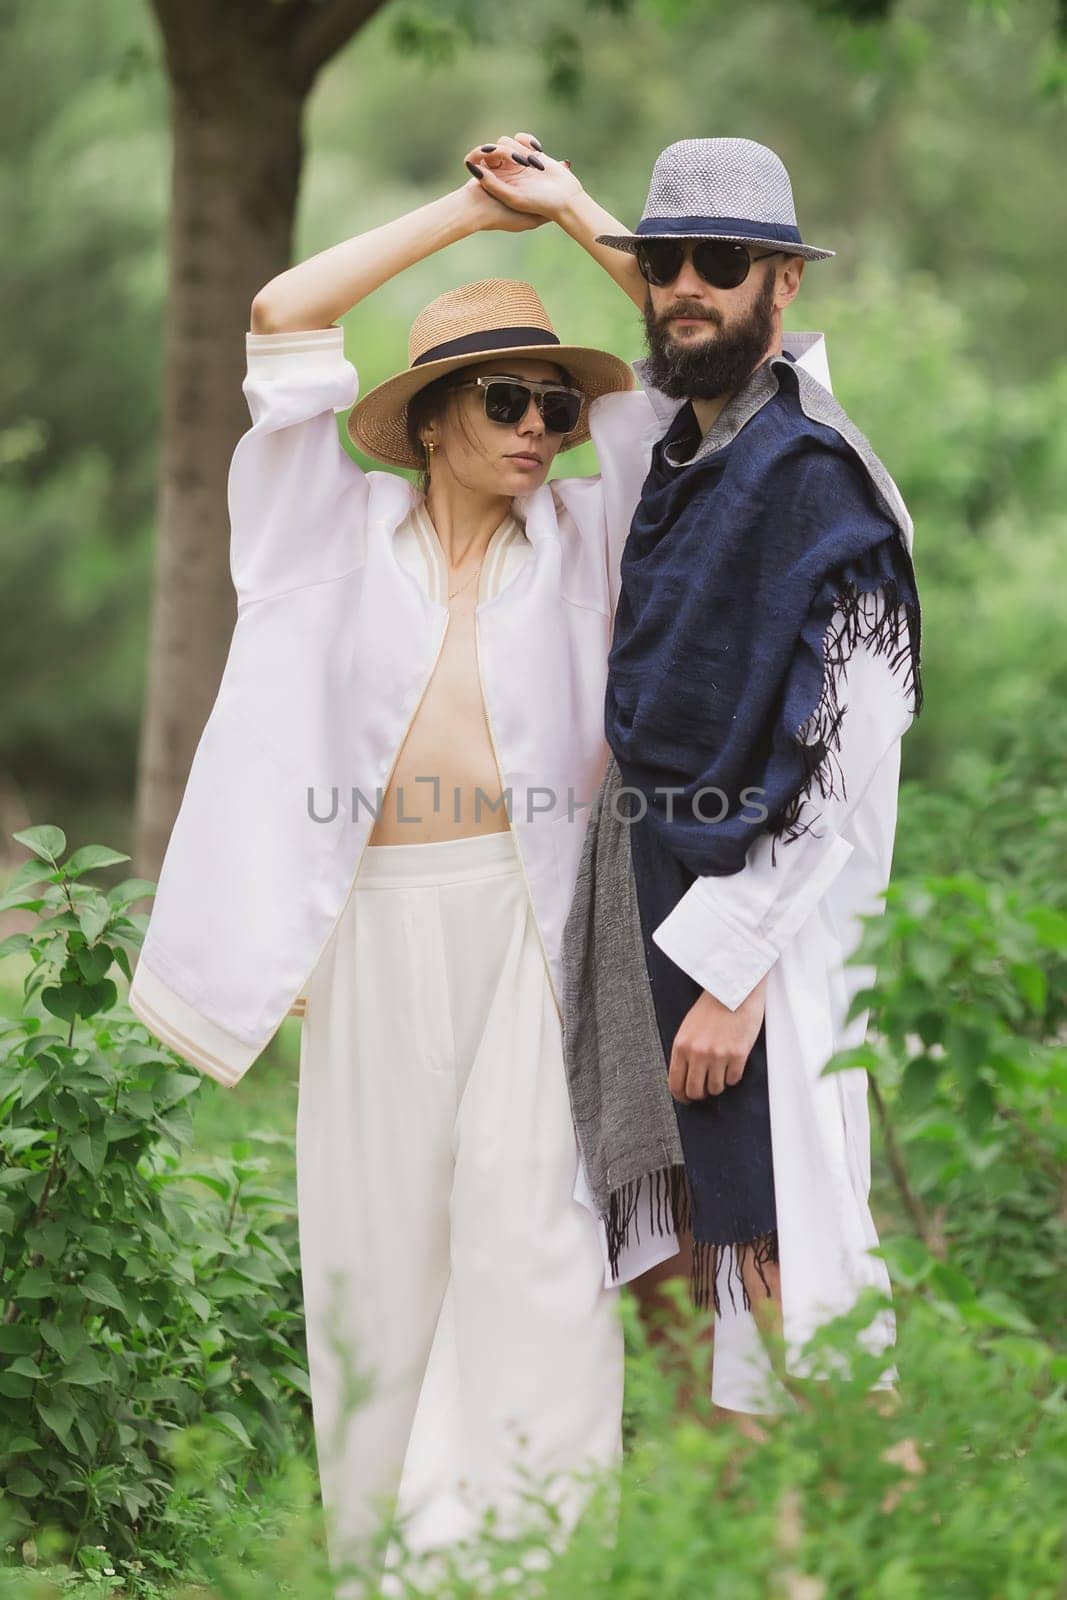 full length view of fashionable couple looking at camera outdoor.